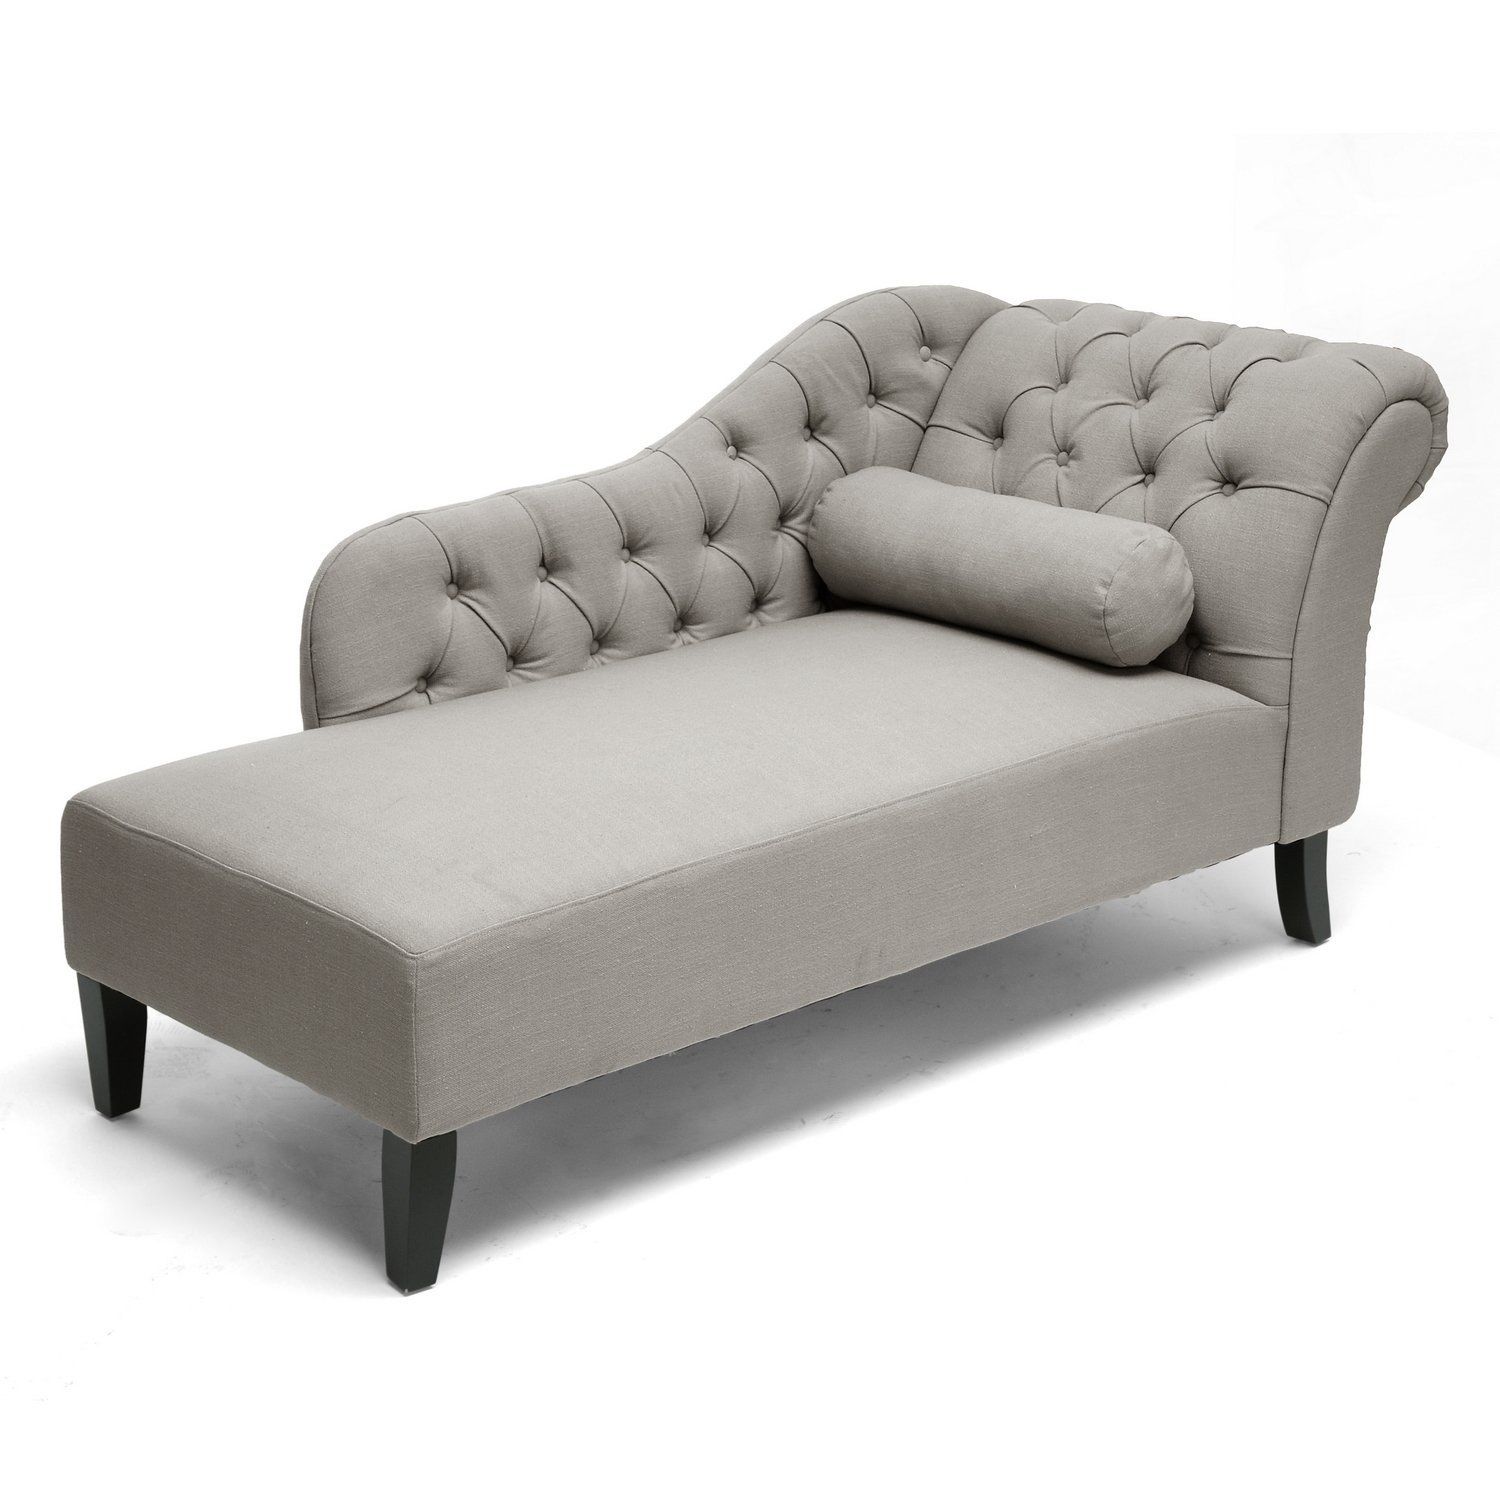 Grey Chaise Lounges Regarding Best And Newest Furniture: Grey Leather Chaise Lounge Chair (View 14 of 15)